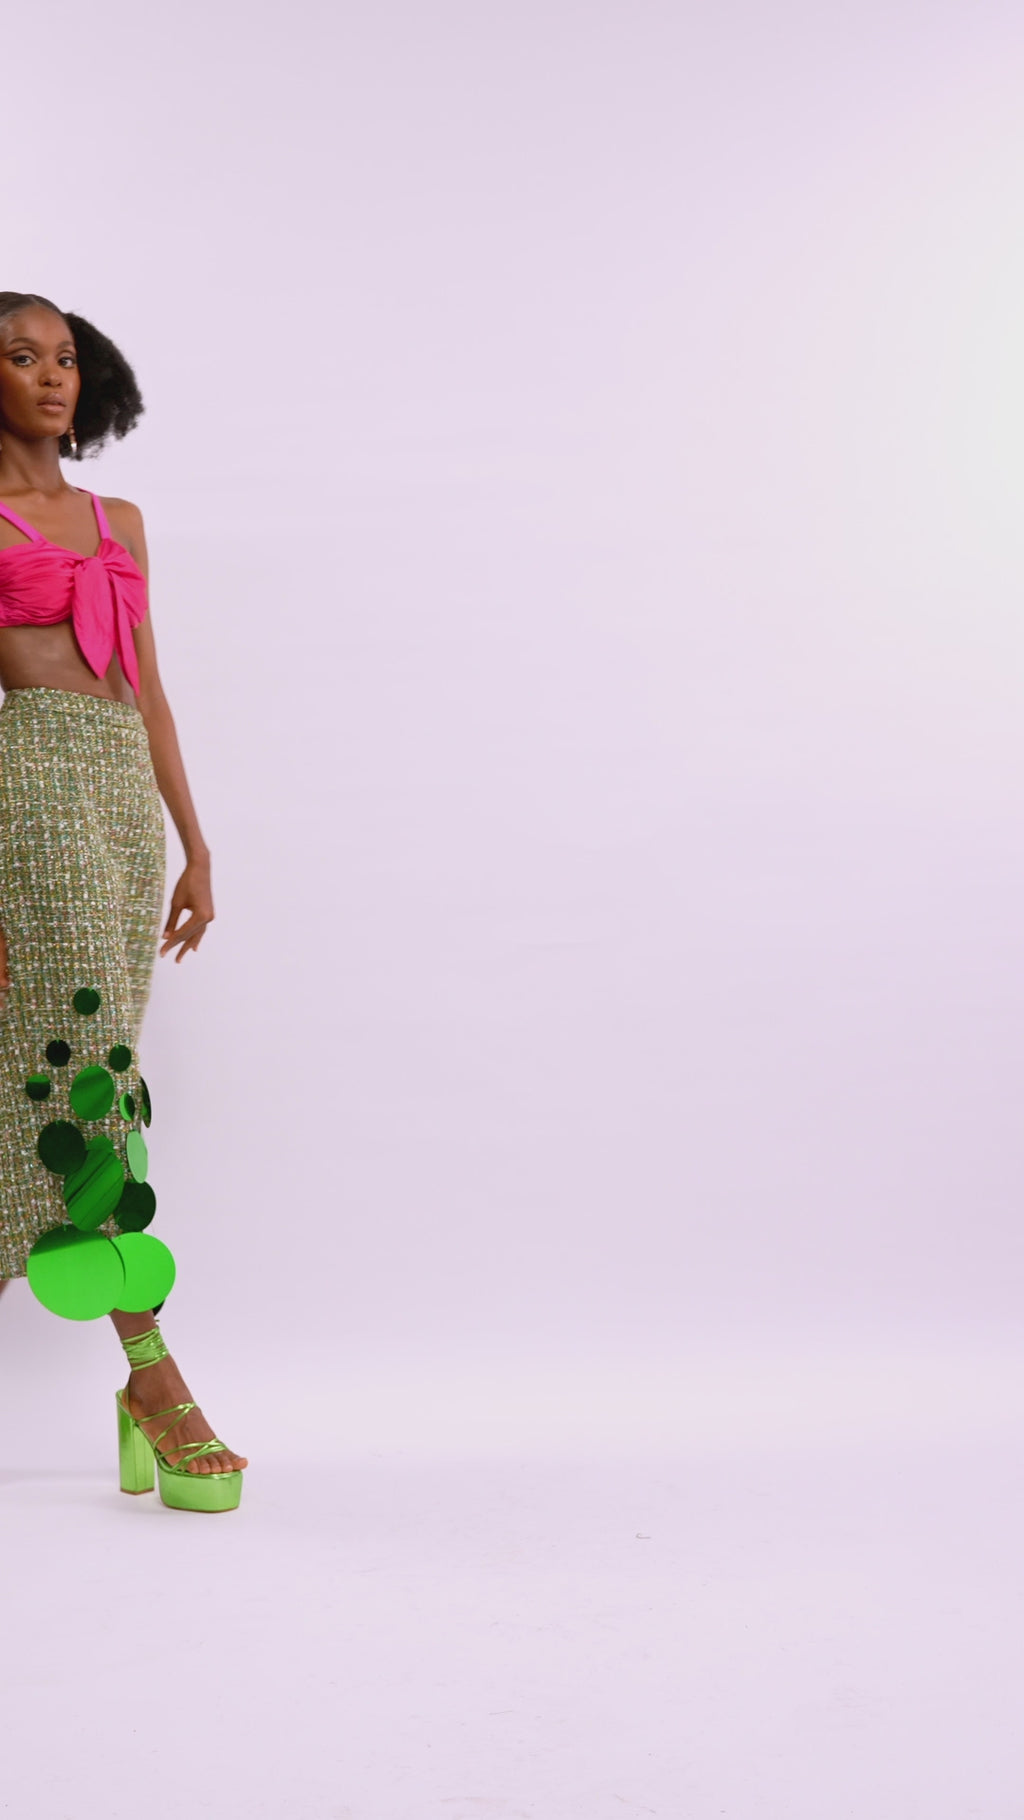 A model wearing a Pink top and a Green skirt with sequins embellishment